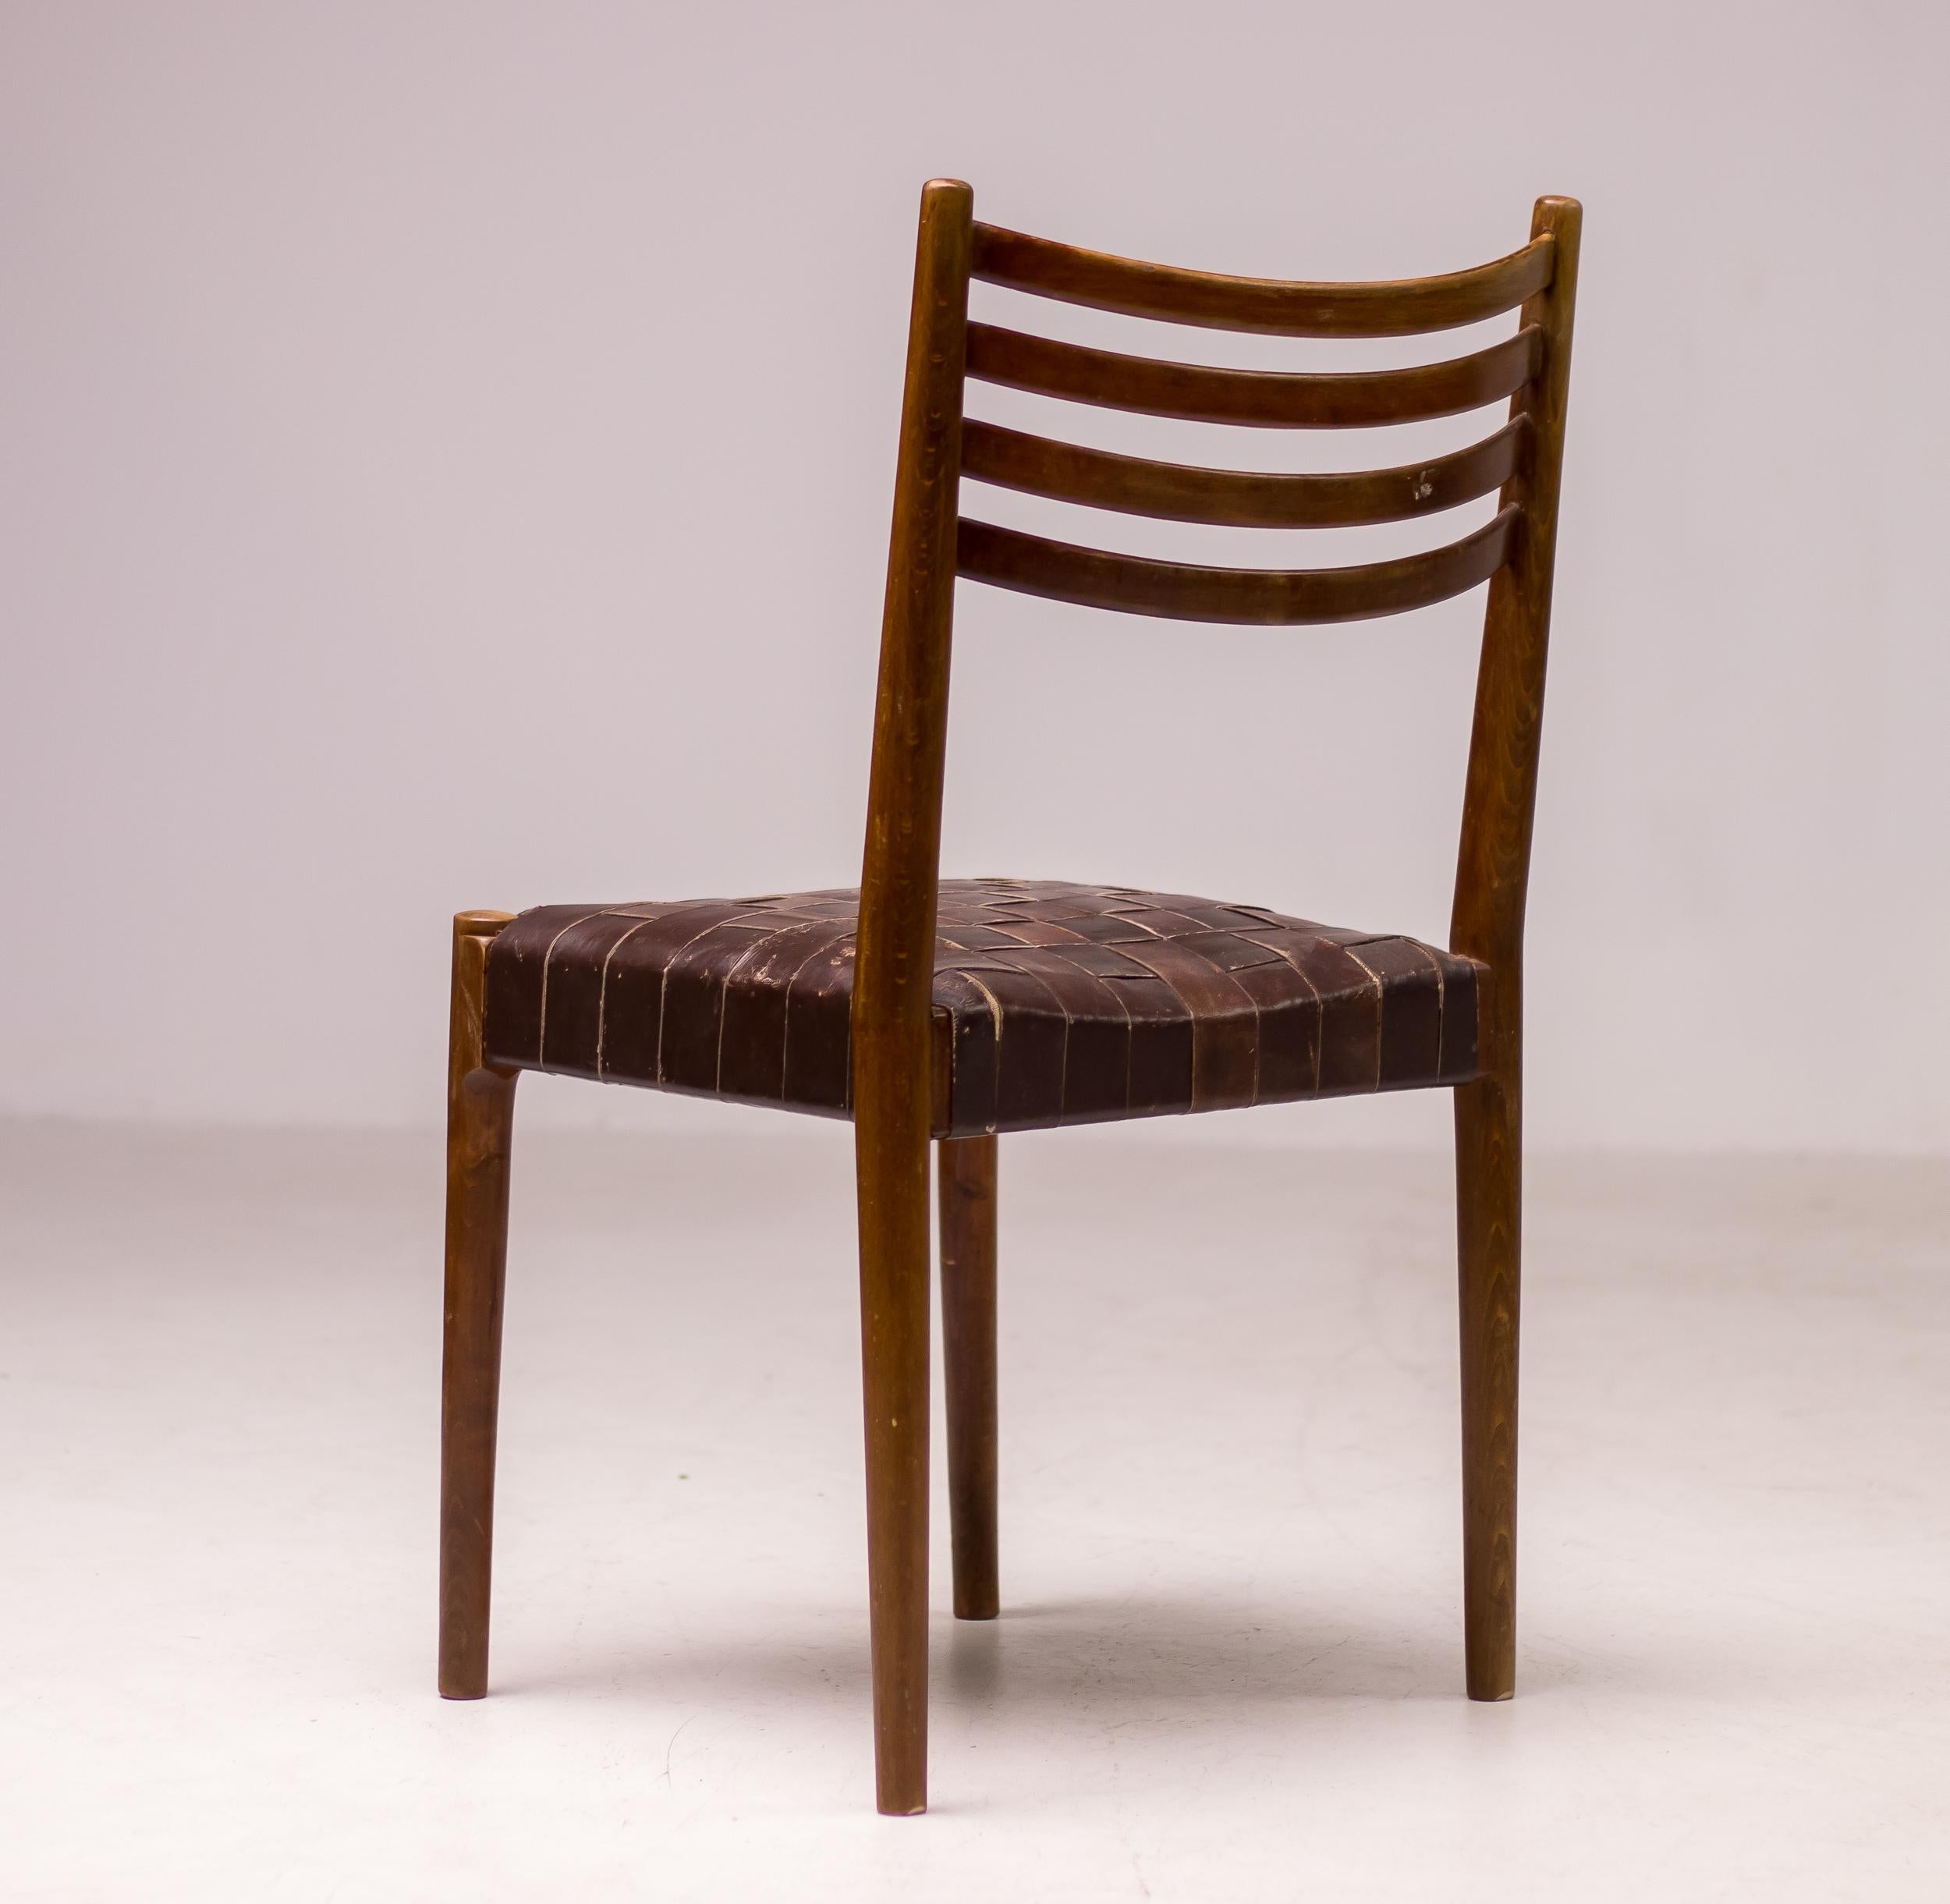 Dark stained beech chair with a webbed leather seating. The chair is attributed to Palle Suenson, as they come from the office building of the Aarhus Oliefabrik (1938-1942), which was designed and furnished by Suenson. 
The chair is in beautiful all